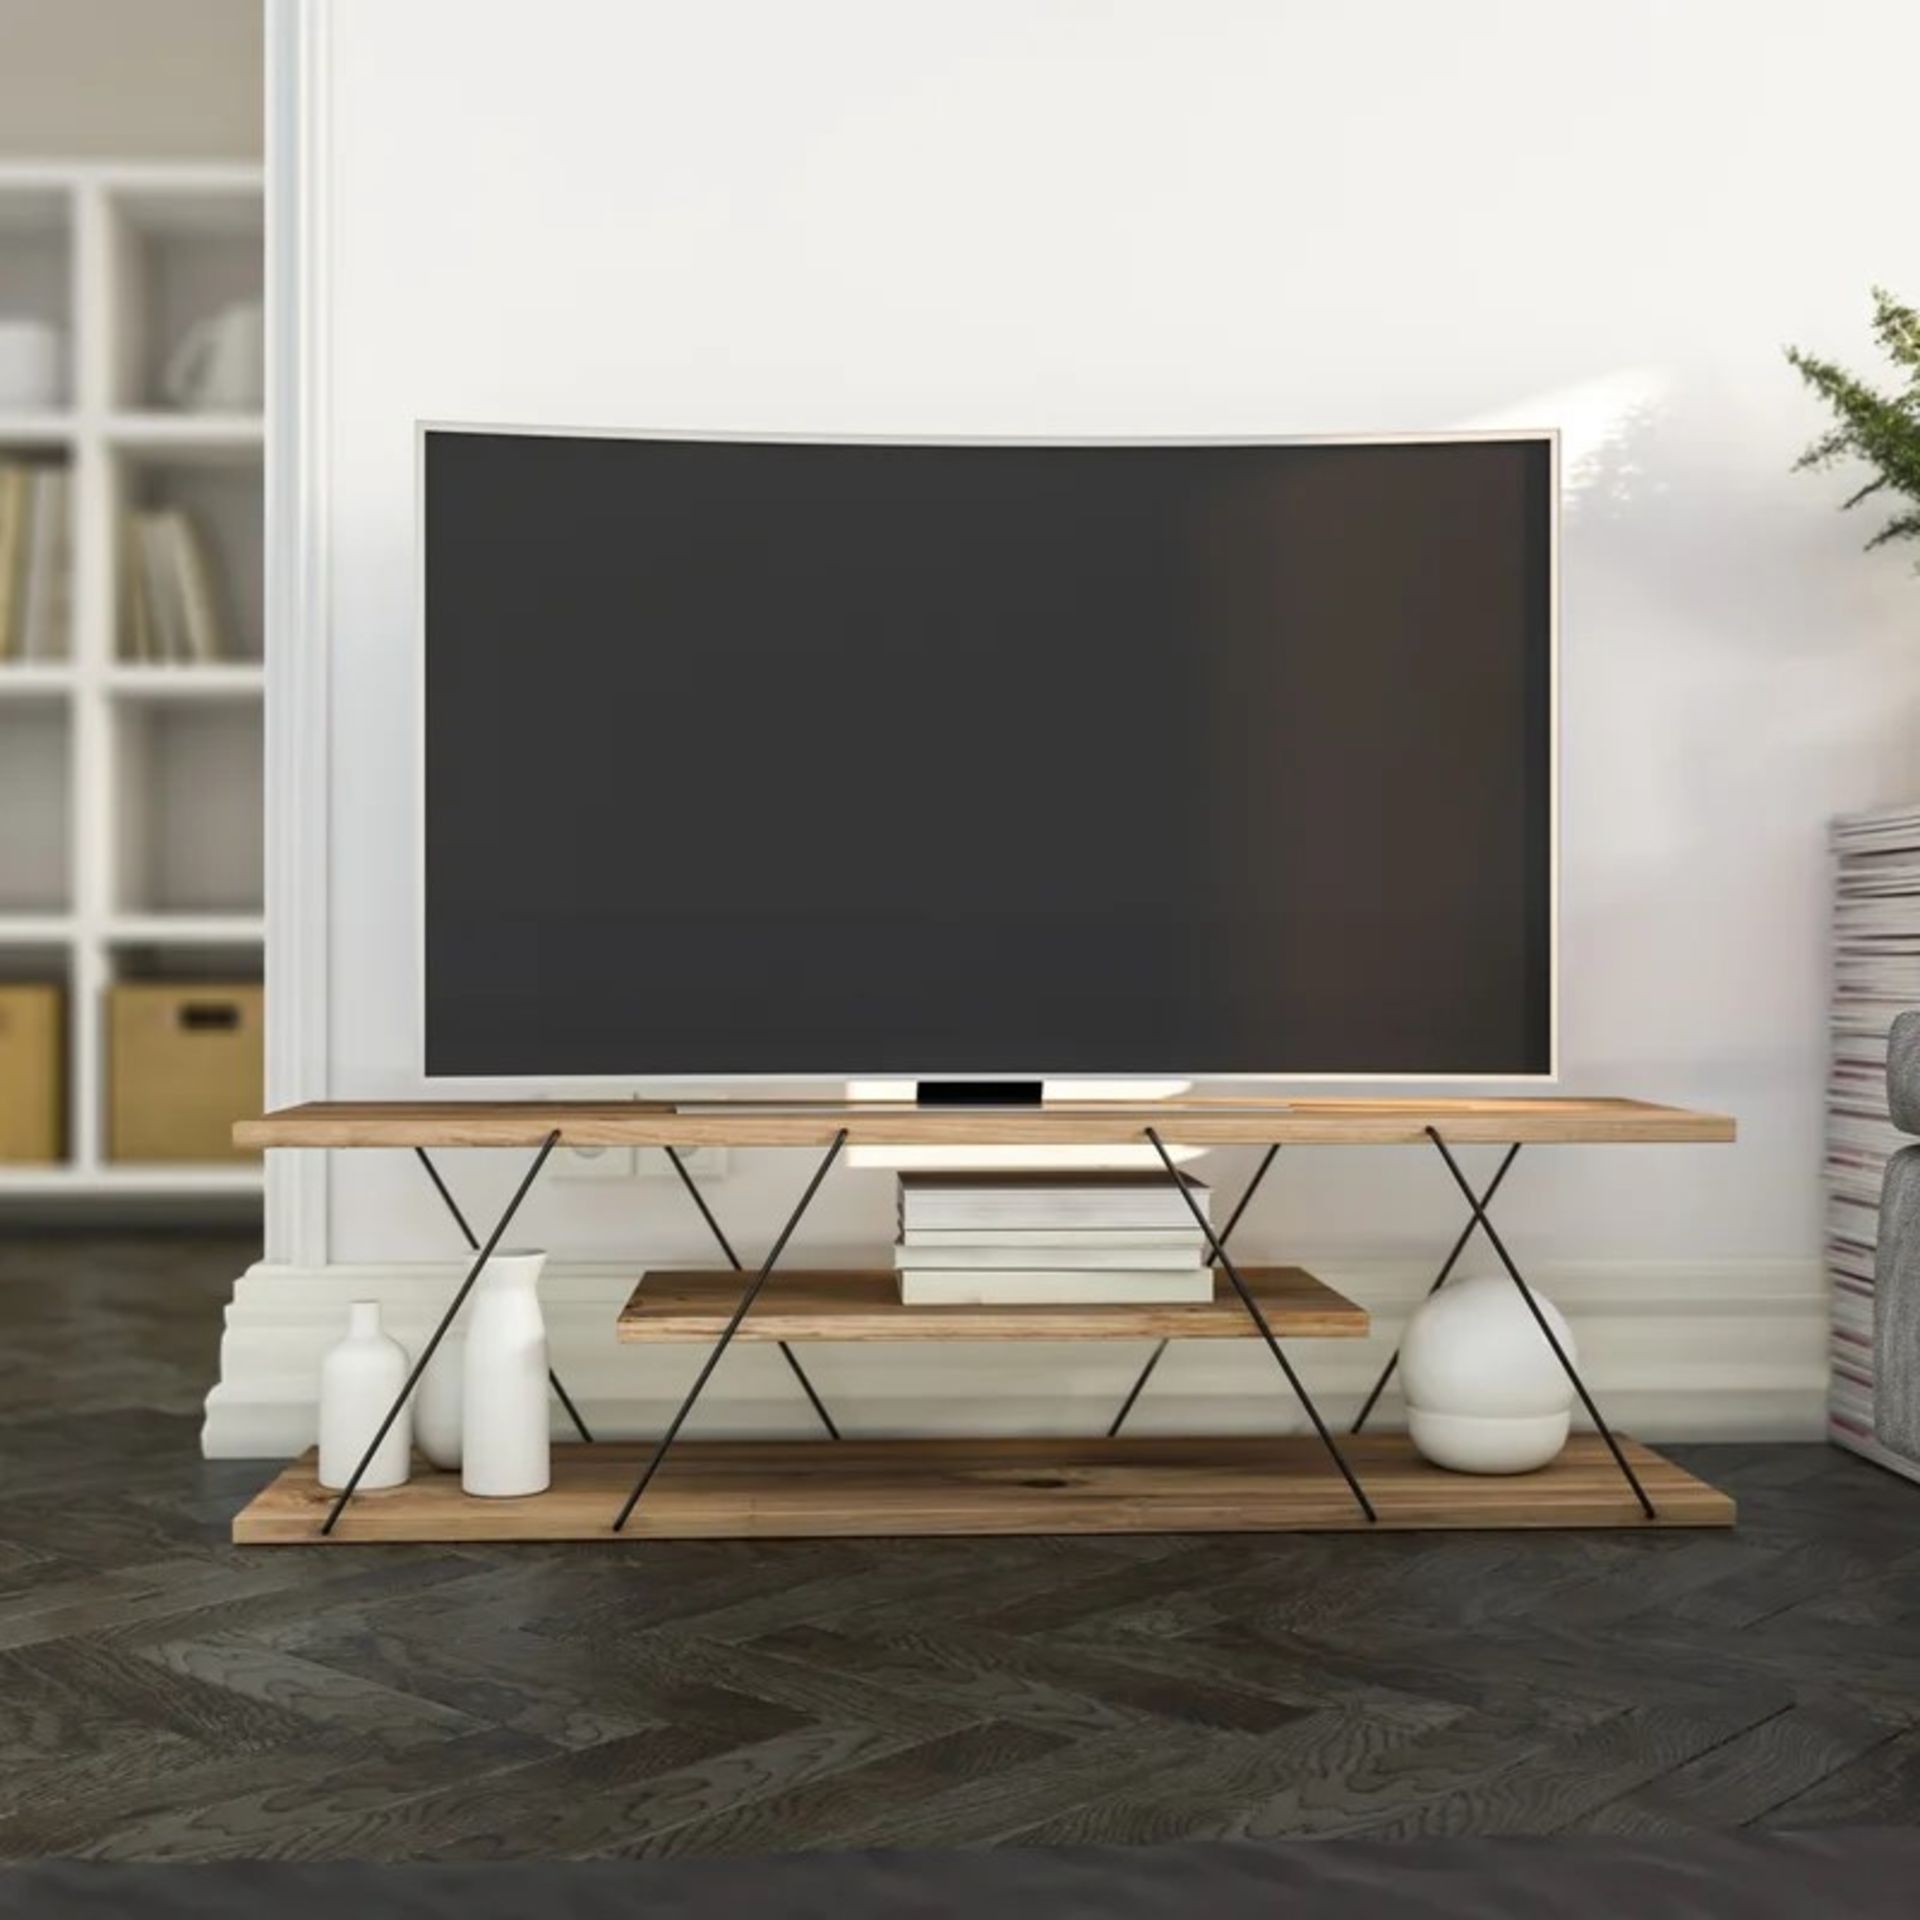 RRP £76.99 - Ewer TV Stand for TVs up to 50" - Image 2 of 2